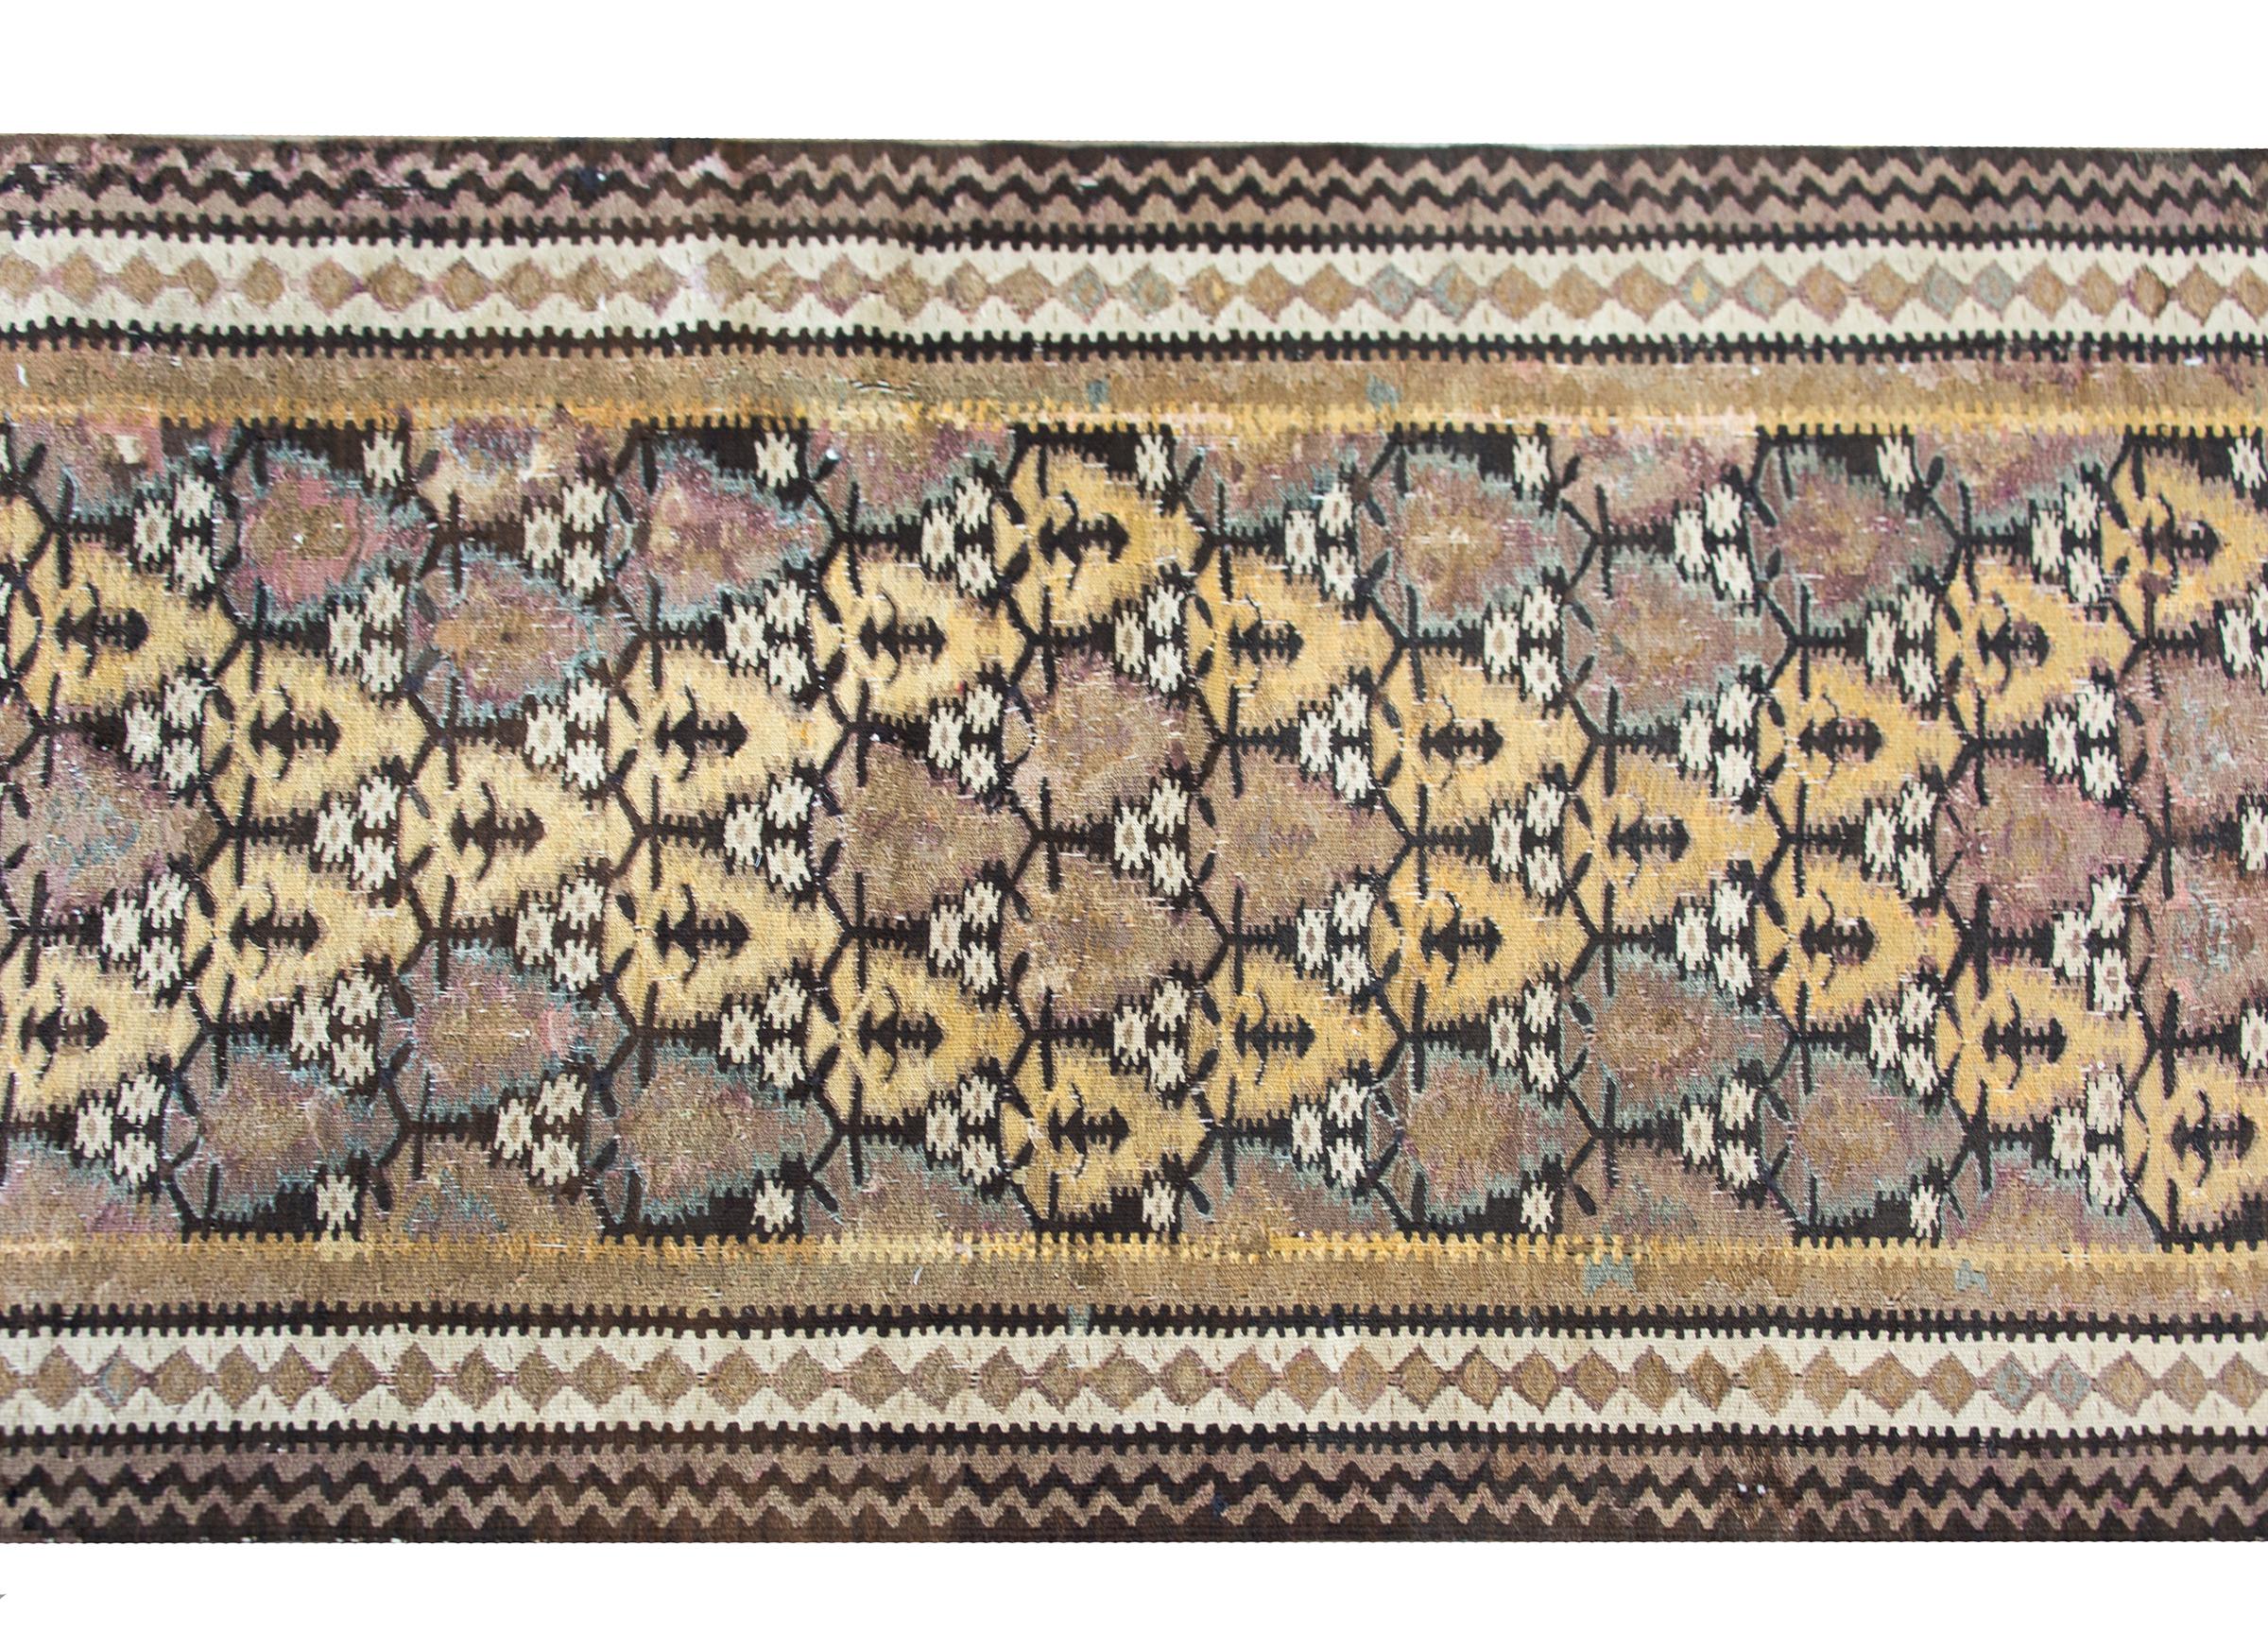 A beautiful early 20th century Persian Qazvin kilim rug with an all-over tree-of-life pattern woven in muted golds, violets, indigos, and natural browns and whites, and surrounded by a border composed of multiple petite geometric patterned stripes.